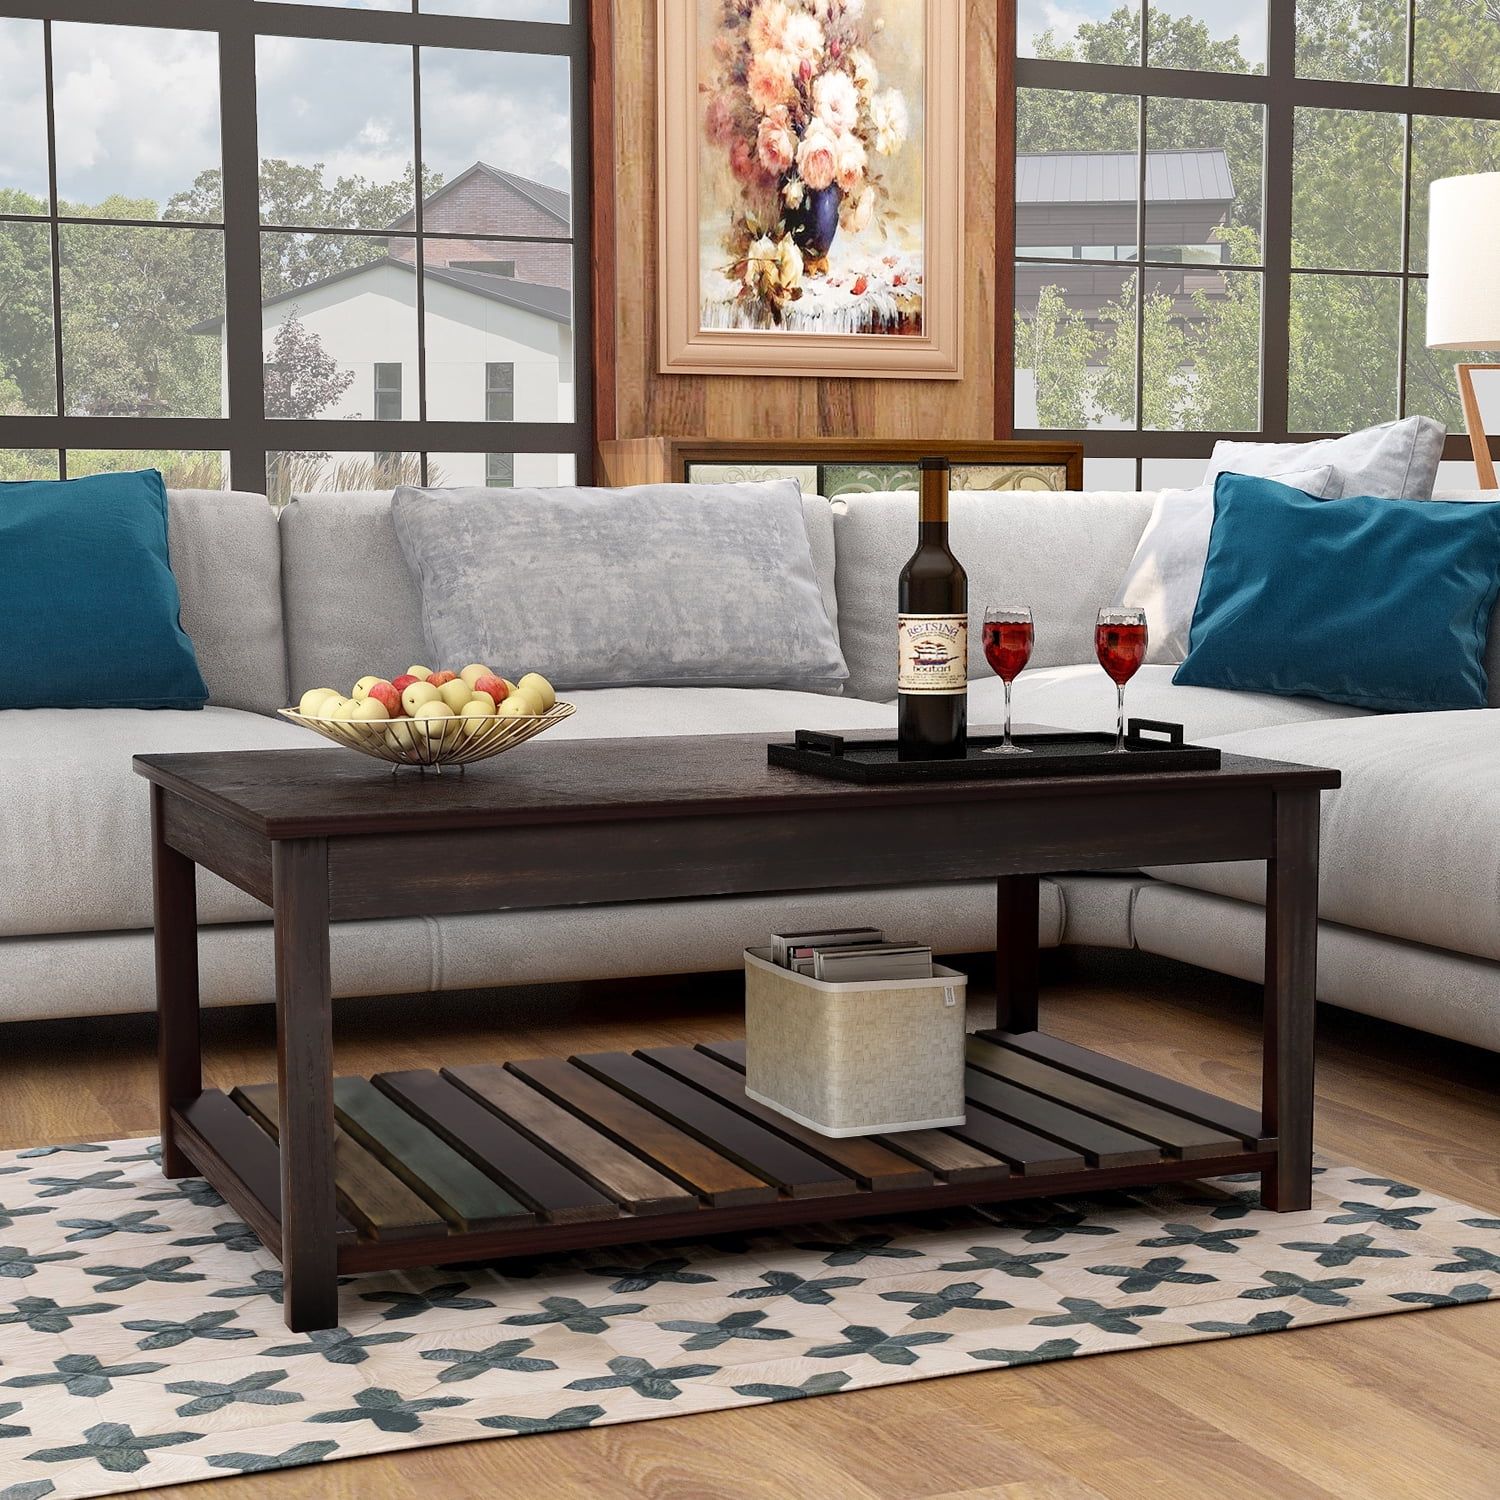 Wood Top Coffee Table For Living Room, Natural Wooden Simple Design With Wood Coffee Tables With 2 Tier Storage (Gallery 17 of 20)